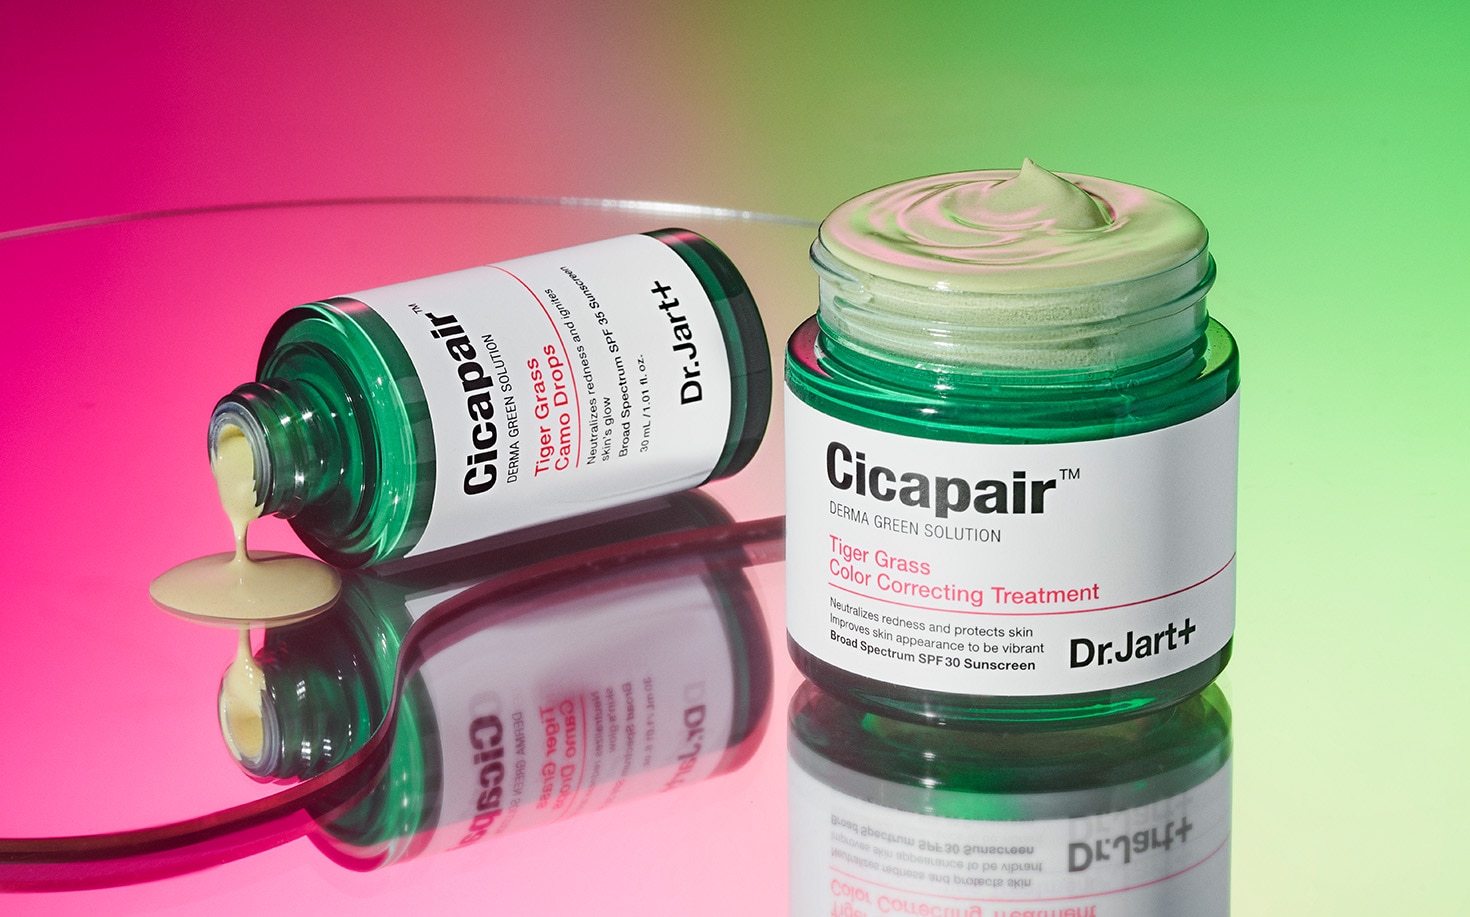 Cicapair Camo Drops bottle and Color Correcting Treatment jar with ombre back drop. Open containers reveal smooth, green texture